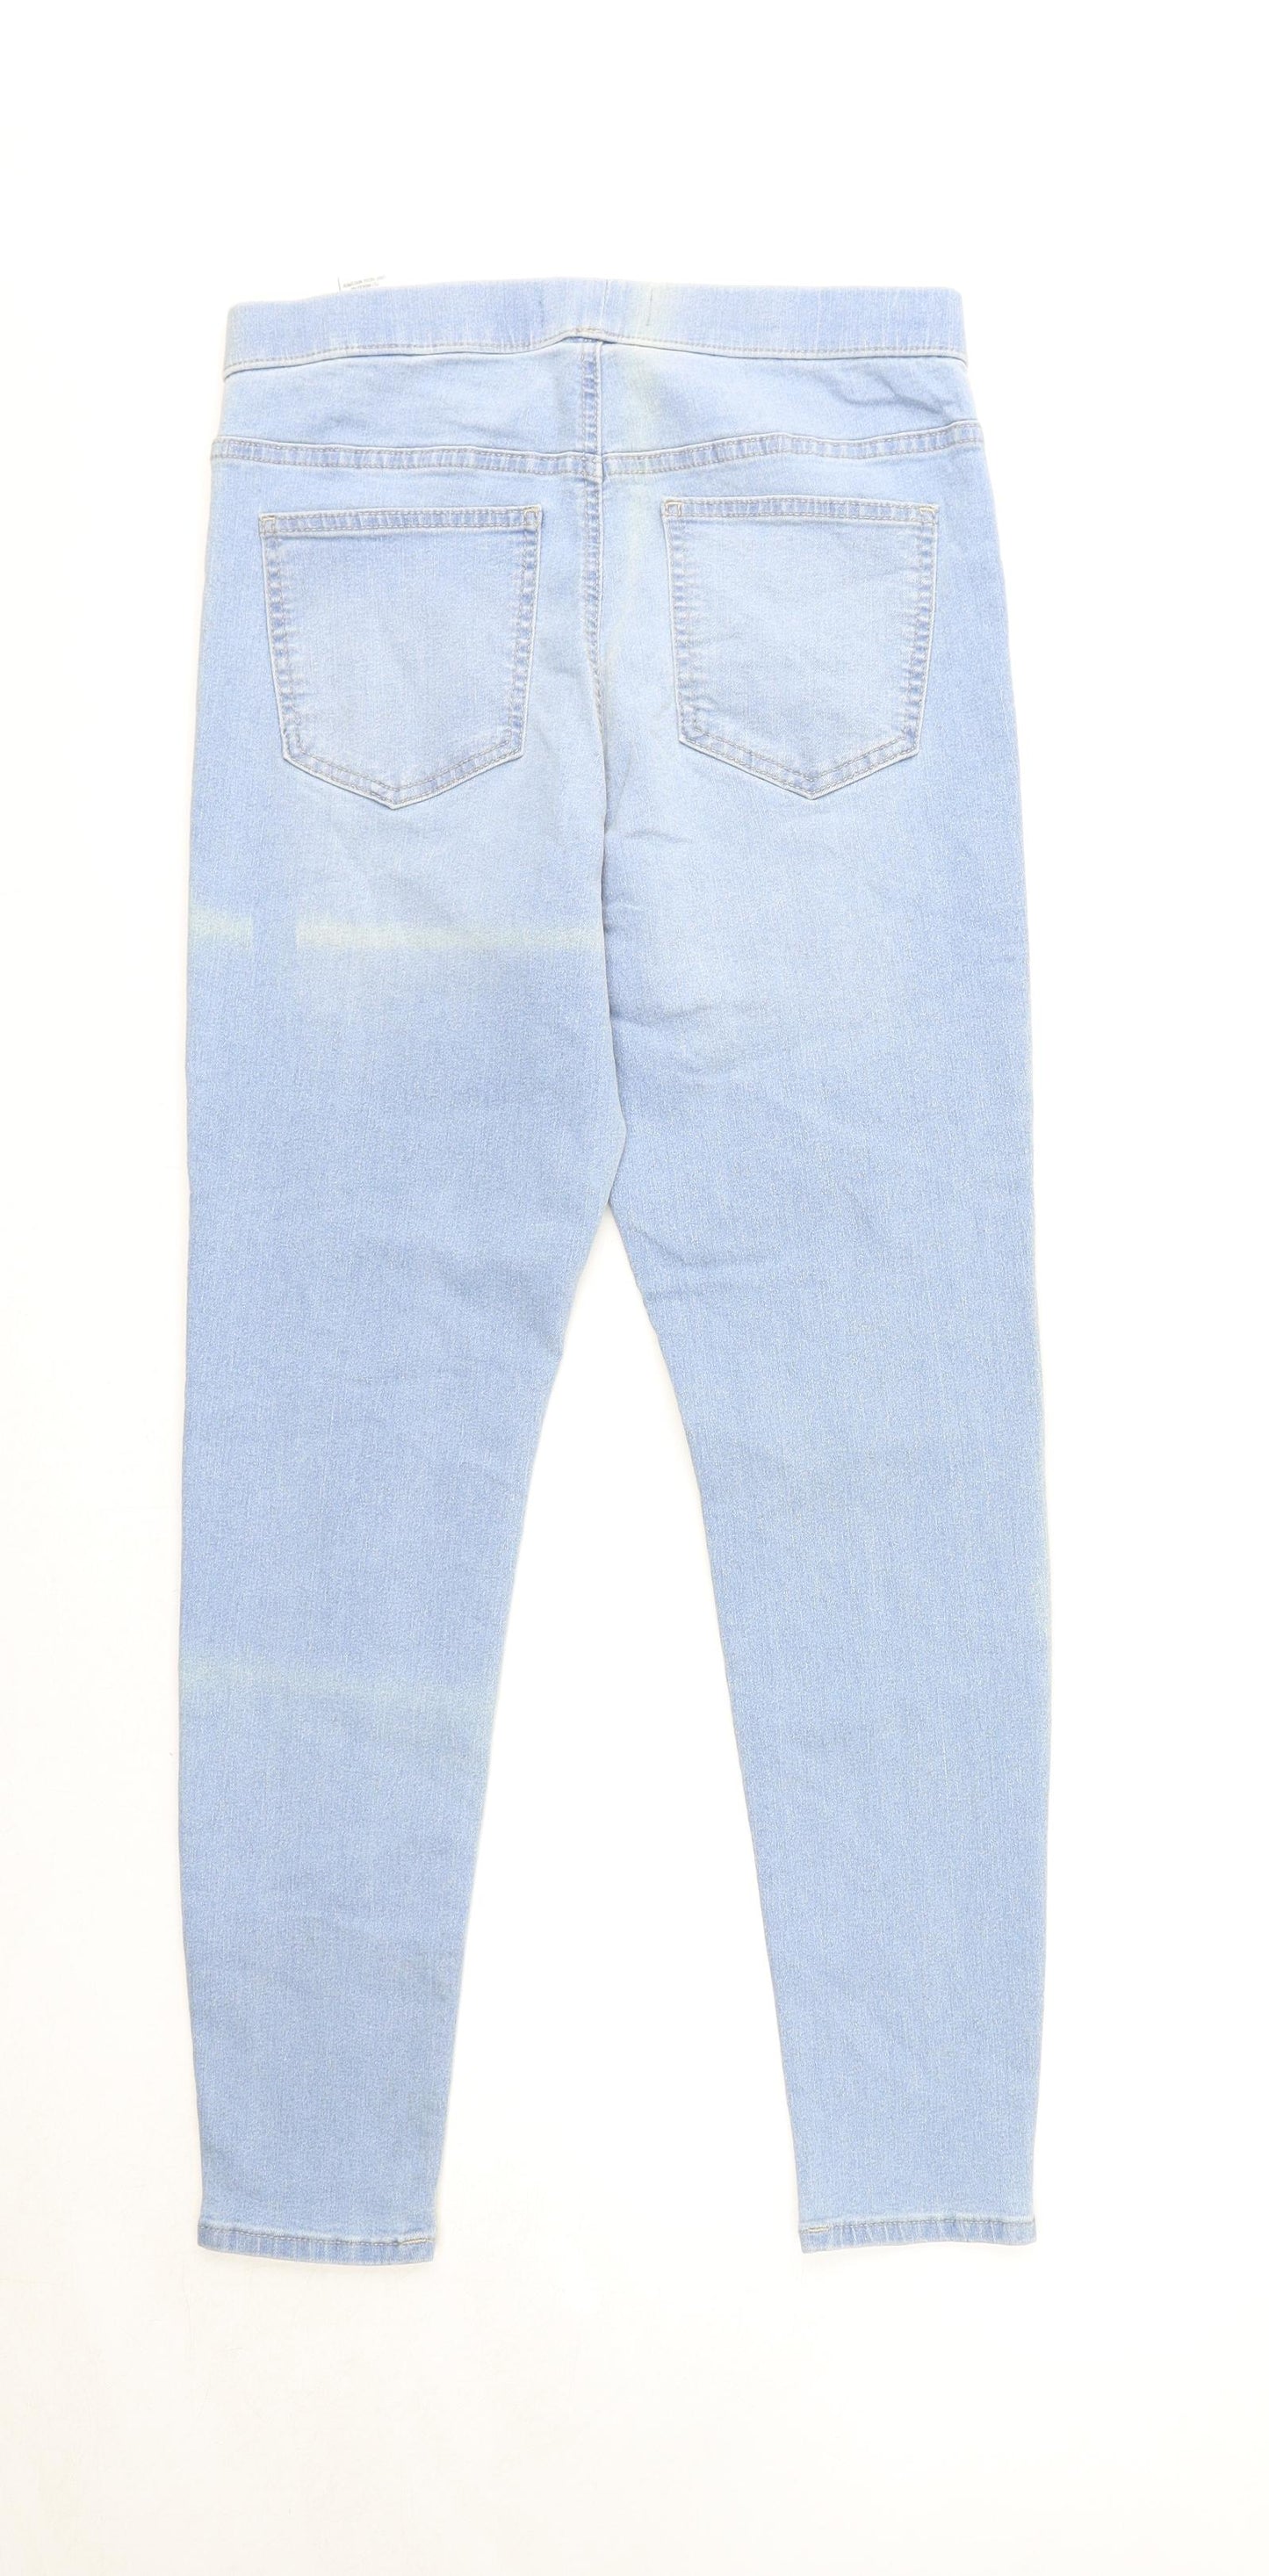 Marks and Spencer Womens Blue Cotton Jegging Jeans Size 12 L28 in Regular